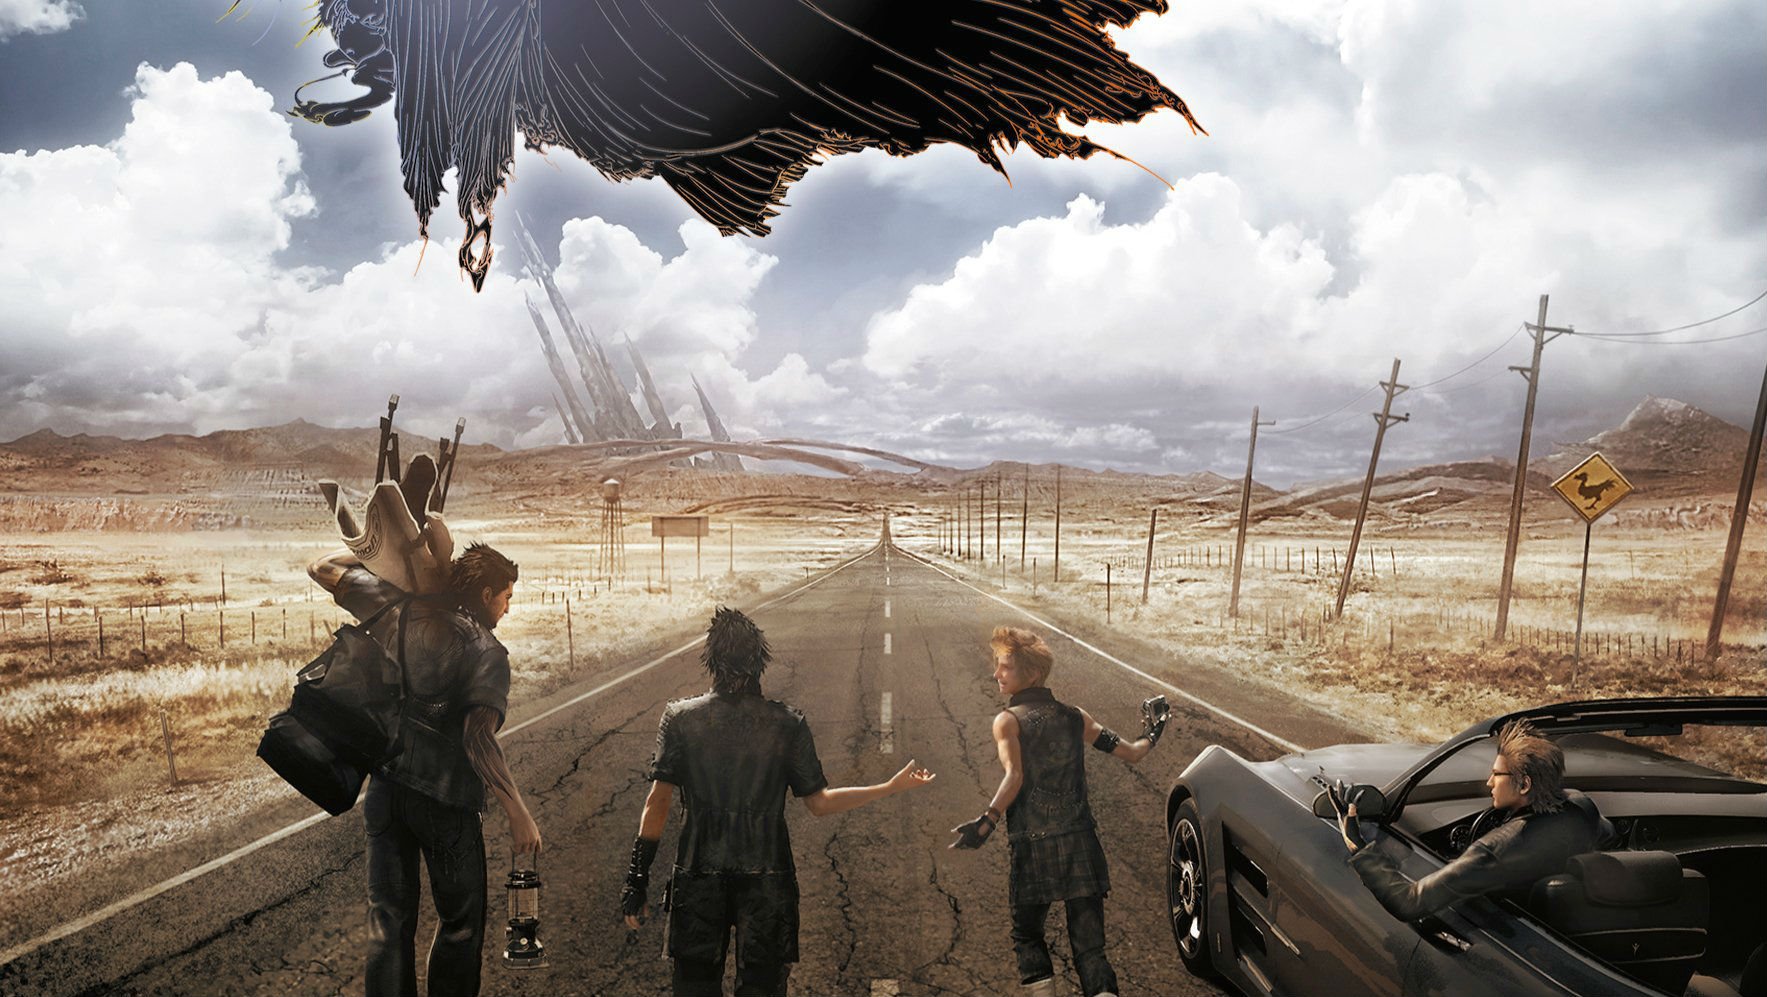 ffxv wallpaper,action adventure game,pc game,strategy video game,shooter game,screenshot